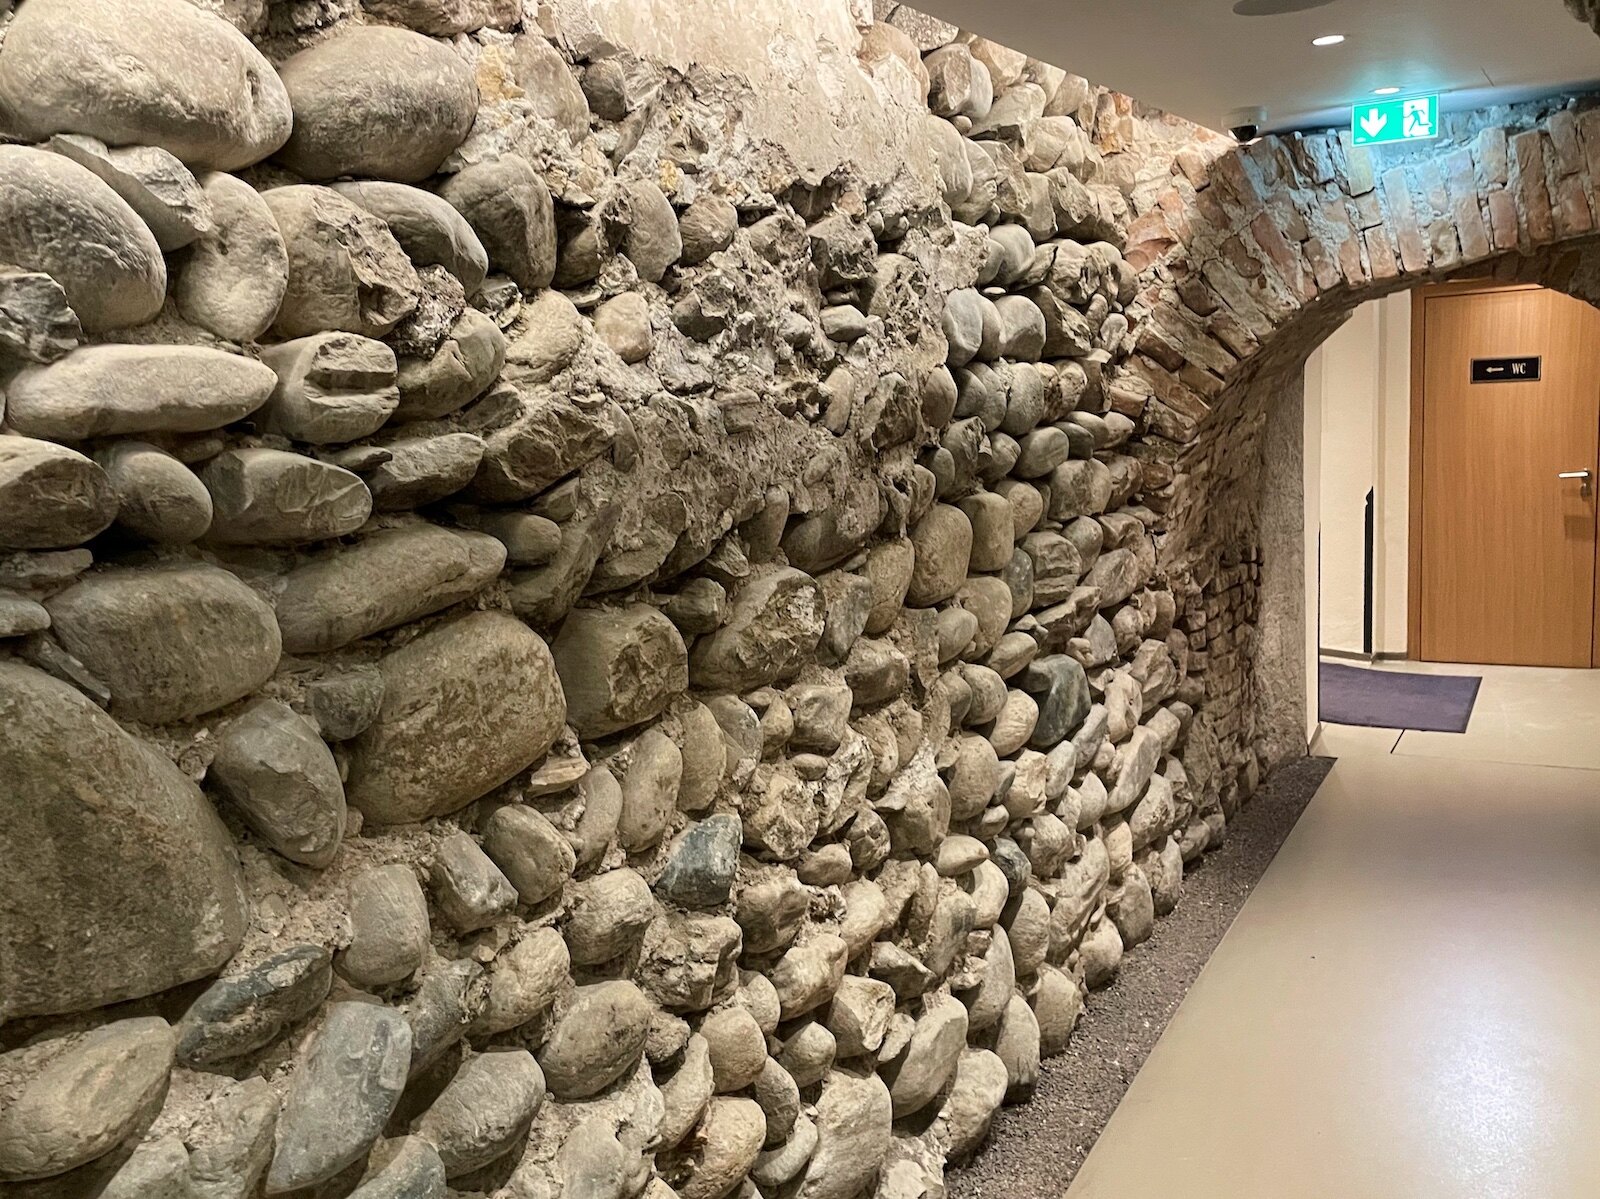 The old stones in the hall to the bathroom, once the foundation of nunnery Stiftskeller.